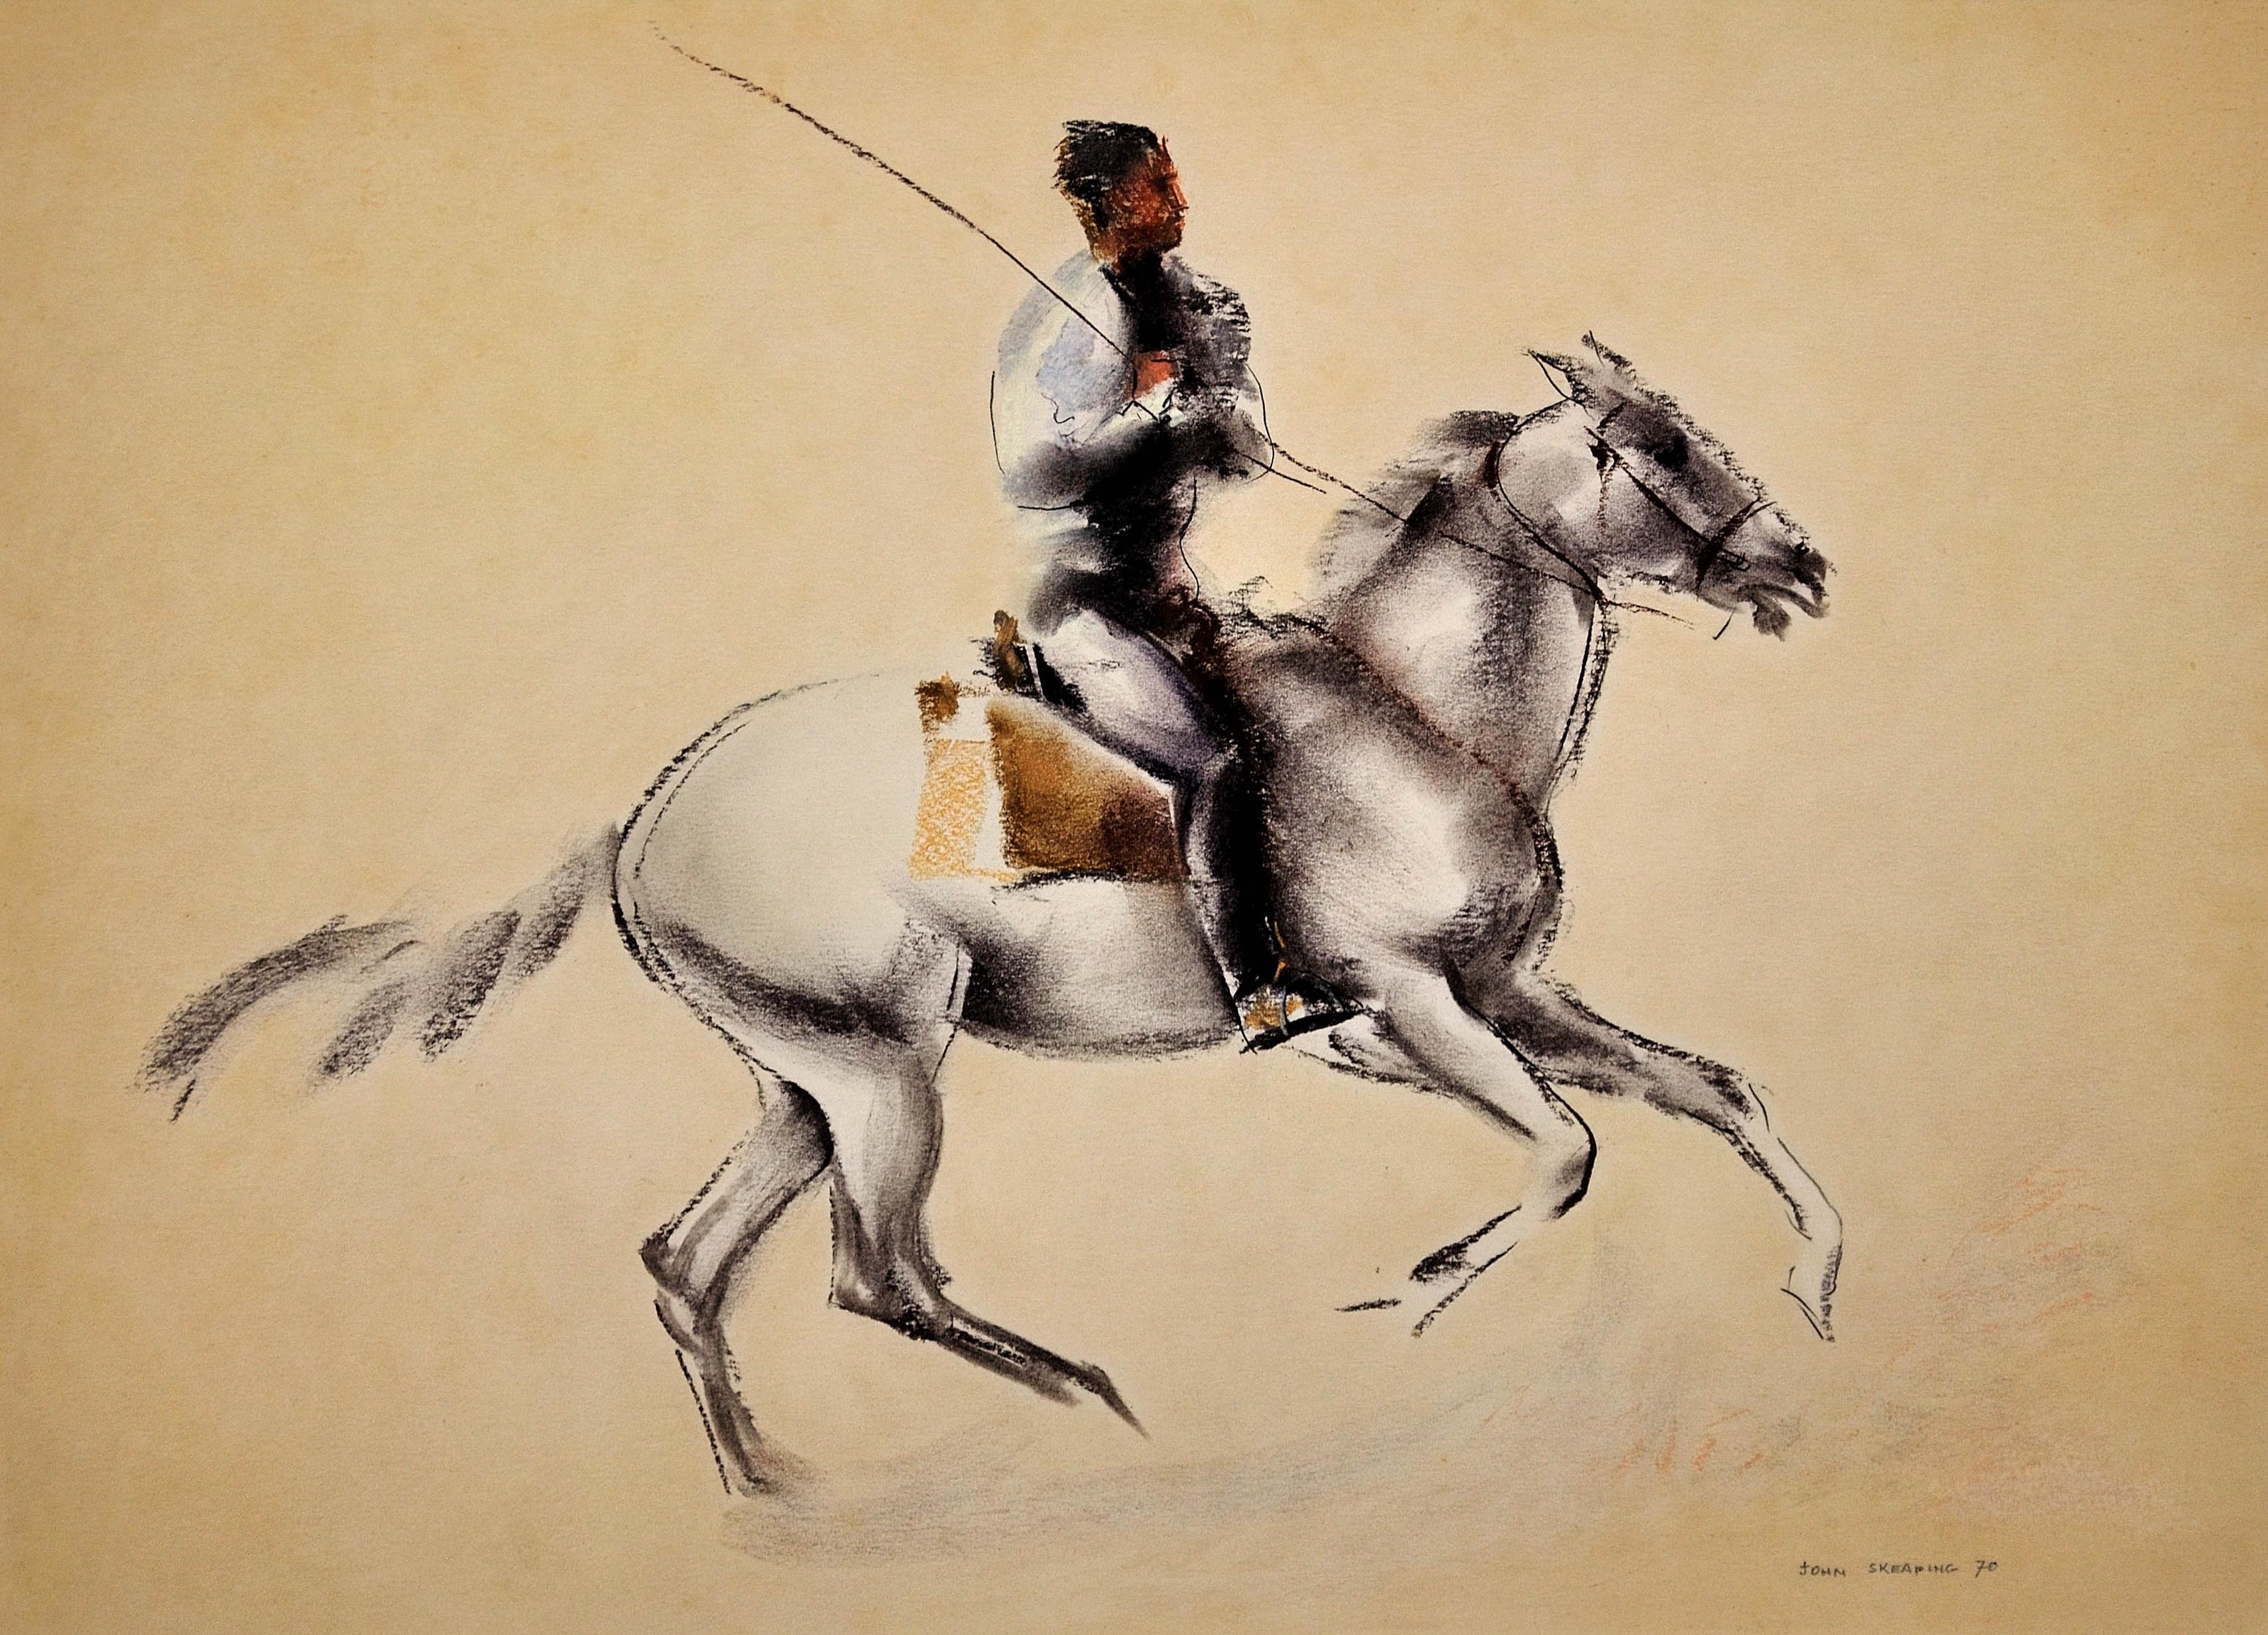 Guardian, Cowboy and Horseman of the Camargue, South of France. Mid-Century. - Art by John Rattenbury Skeaping